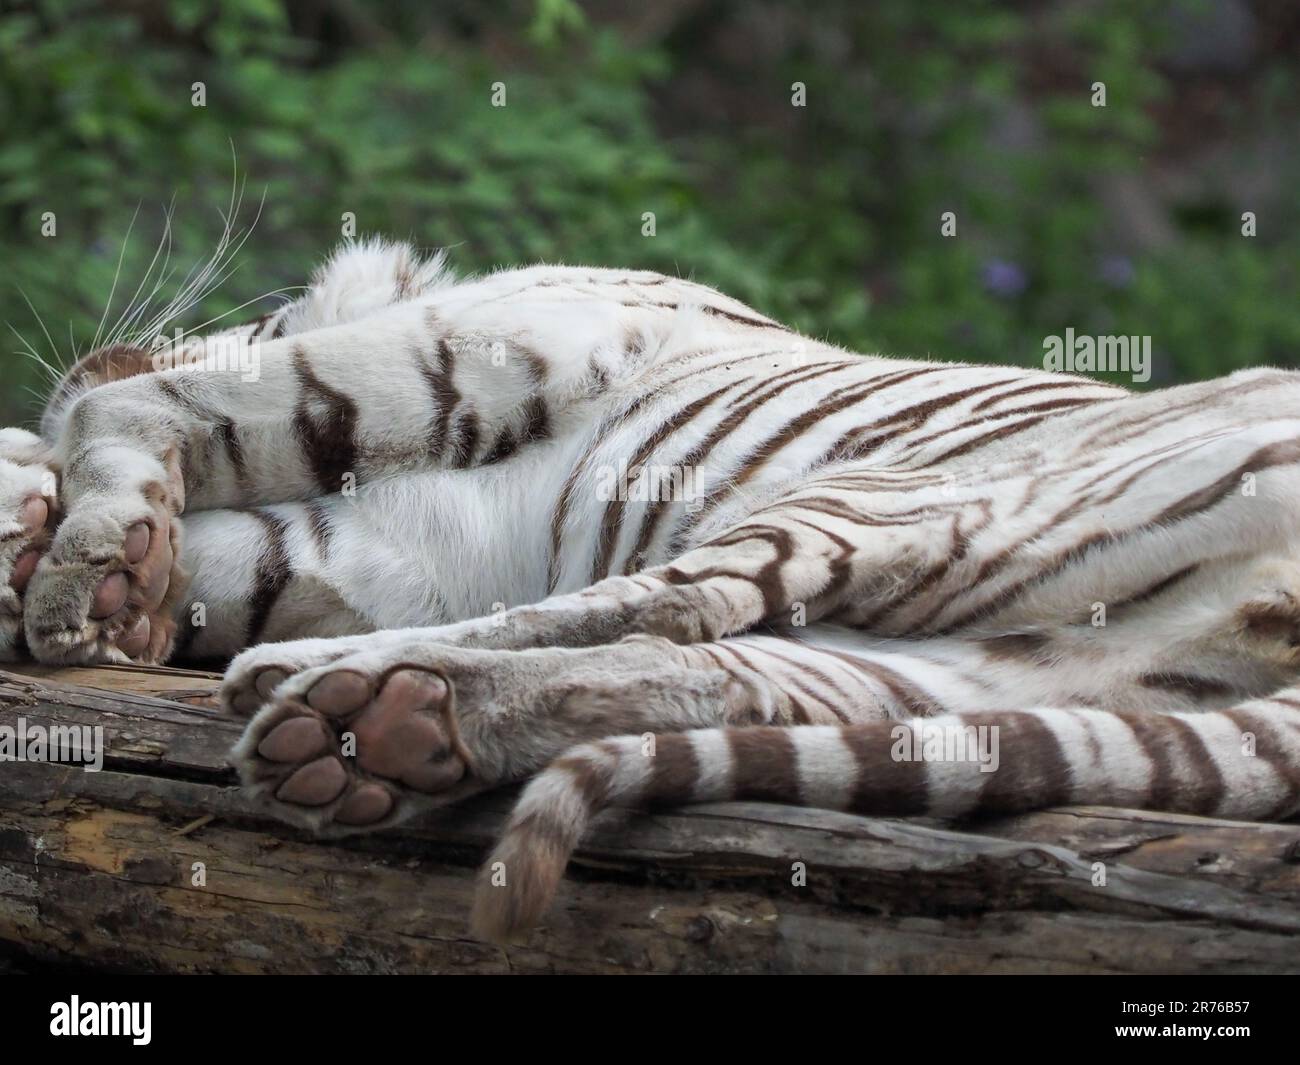 An adult white tiger lounging on a wooden surface in a tranquil outdoor setting. Stock Photo